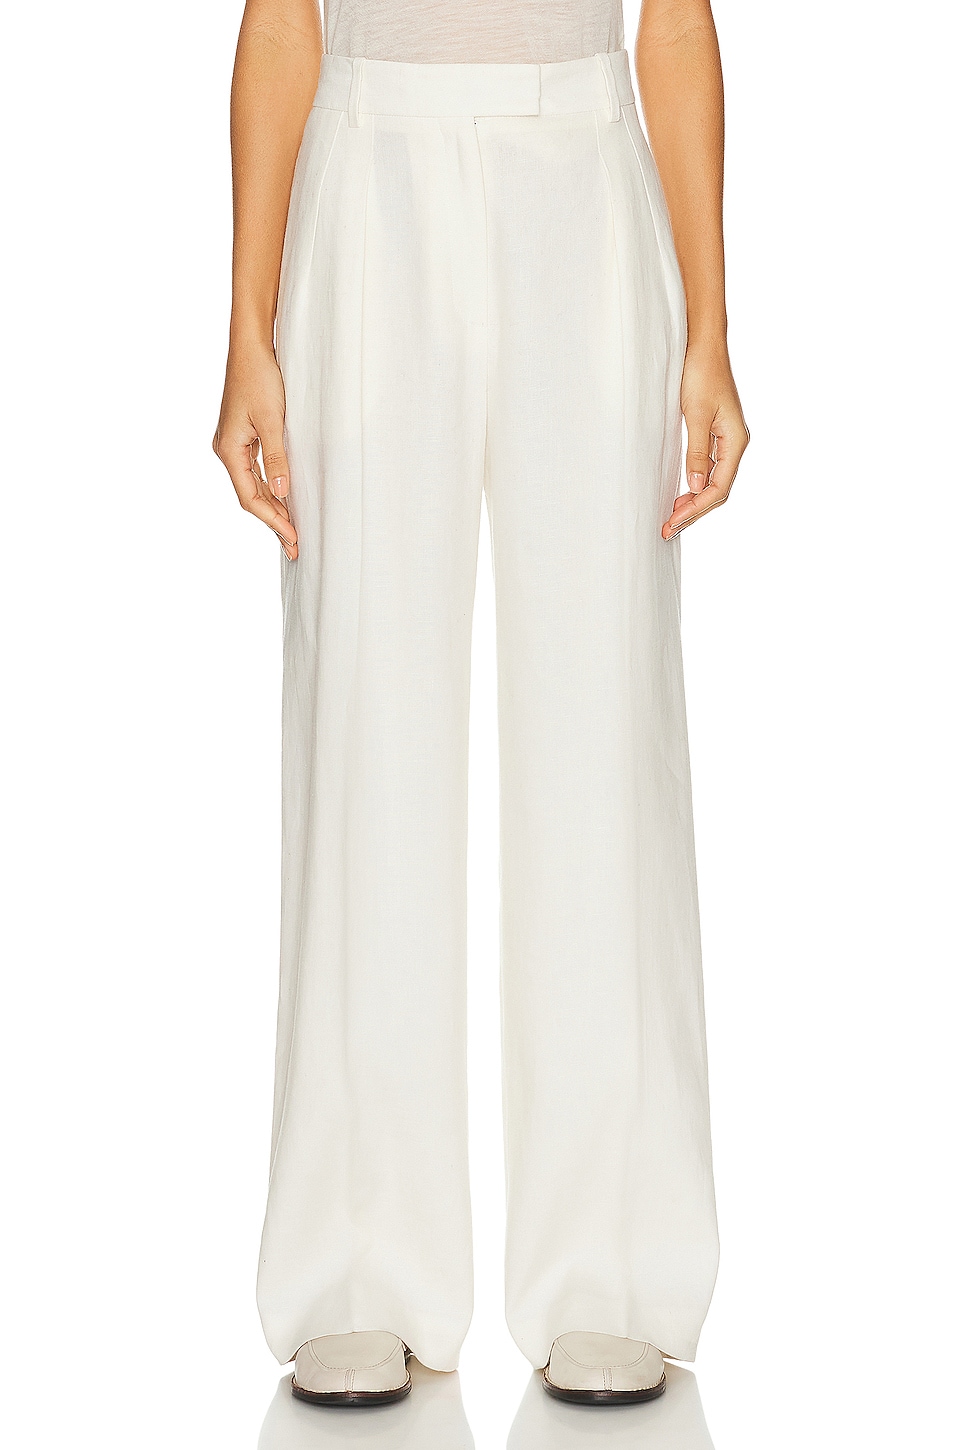 Image 1 of The Row Antone Pant in OFF WHITE